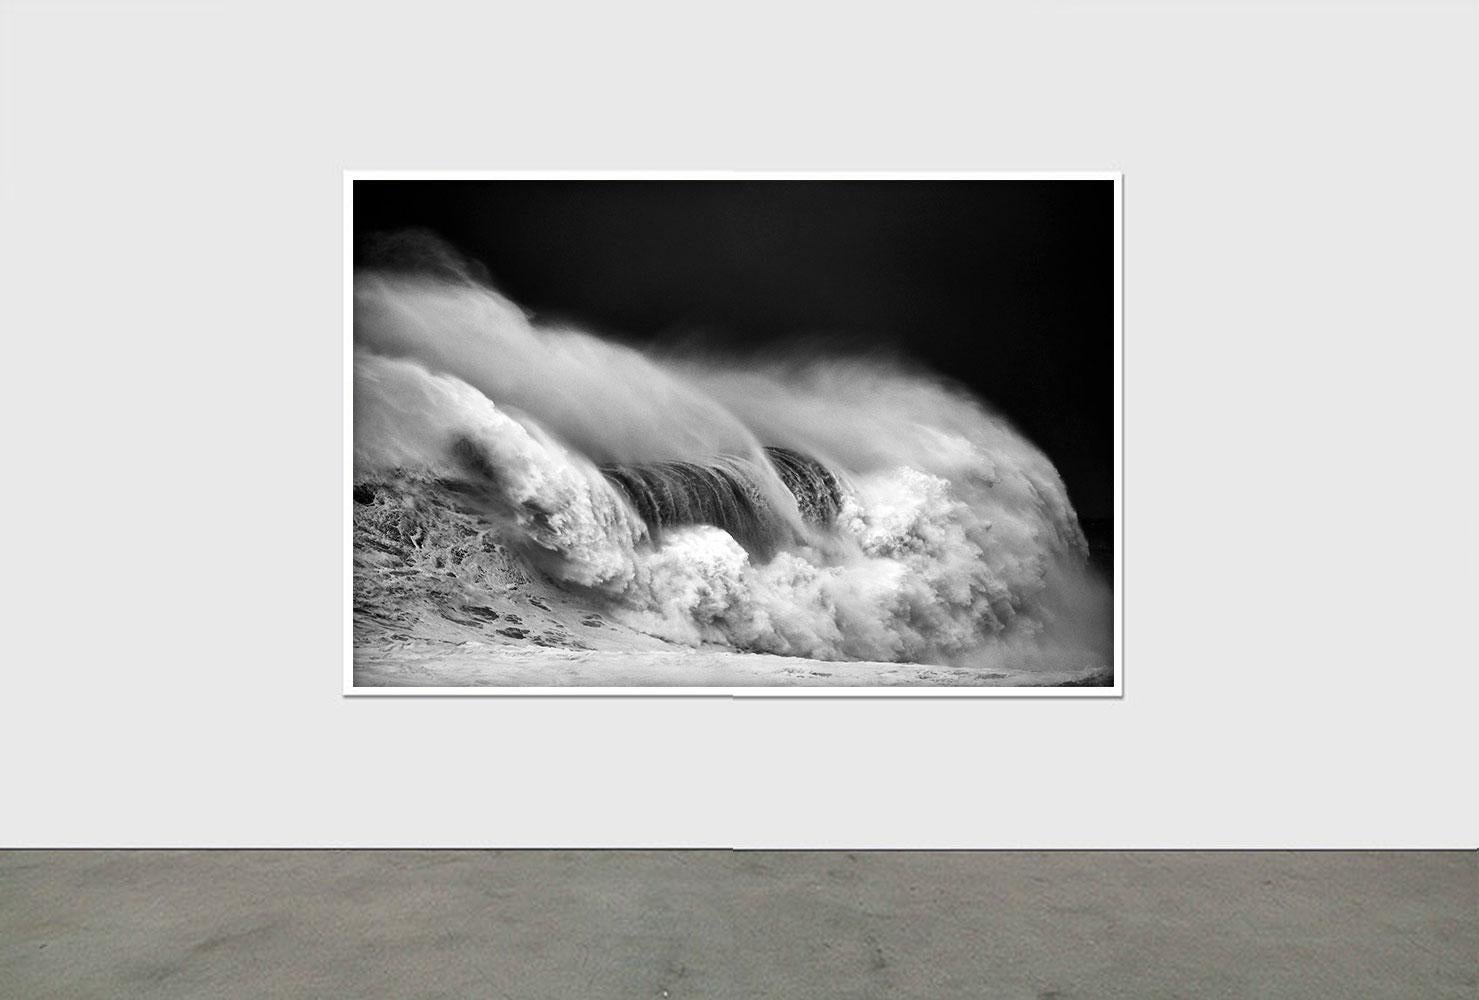 ALESSANDRO PUCCINELLI

Nazare, Portugal, Waves, Seascape Photography, 2019
MARE series
Seascape - From the Mare series - Mounted and Framed

40 x 60 inches
Edition of 5

60 x 88.5 inches
Edition of 3

ALESSANDRO PUCCINELLI
Mare series

Archival